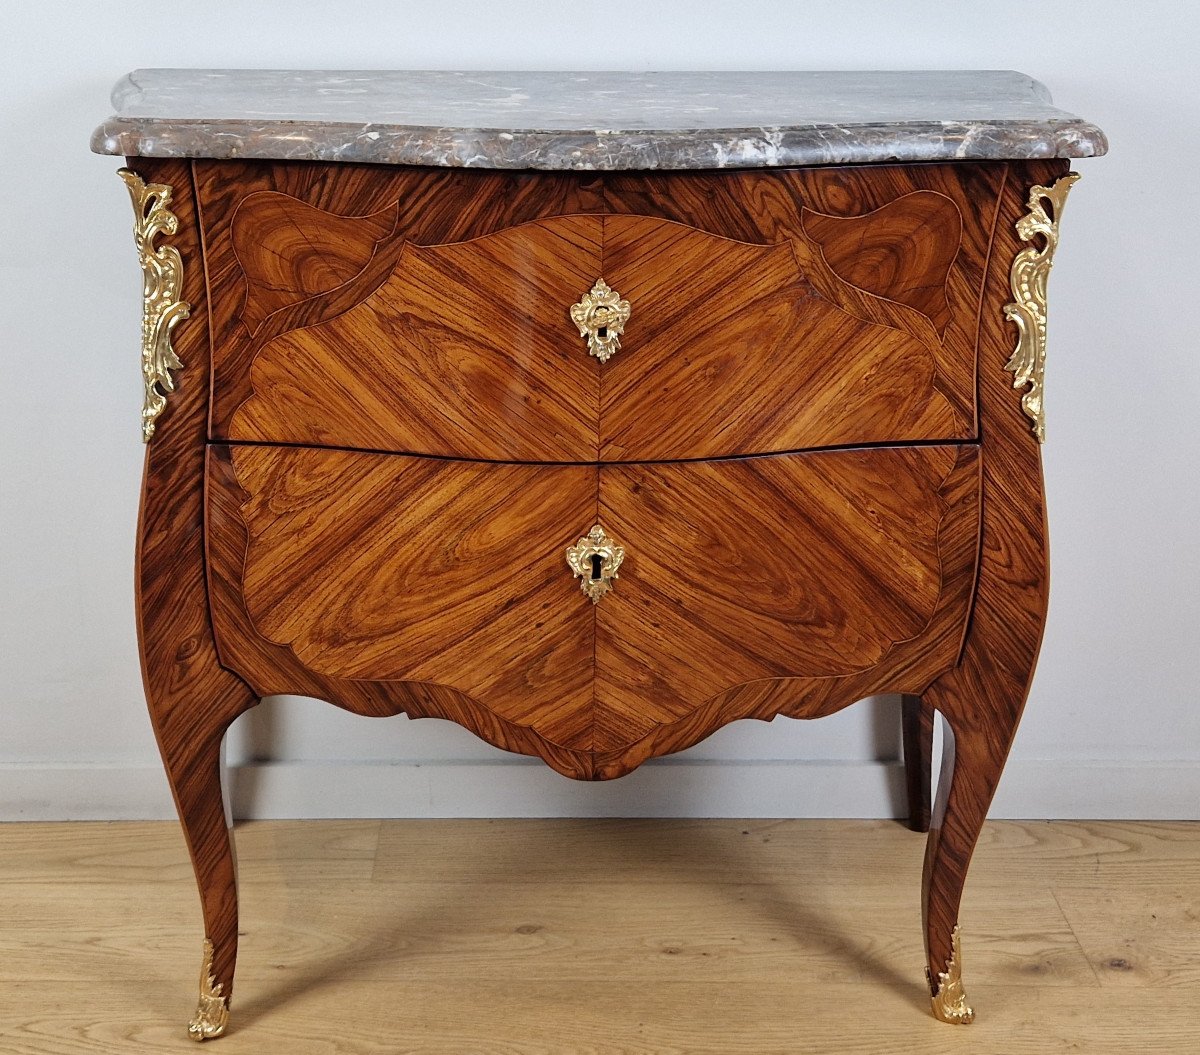 A Louis XV Commode Ormolu-mounted Kingwood, Tulipwood - Marquetry Stamped Christophe Wolff, Mid 18th C